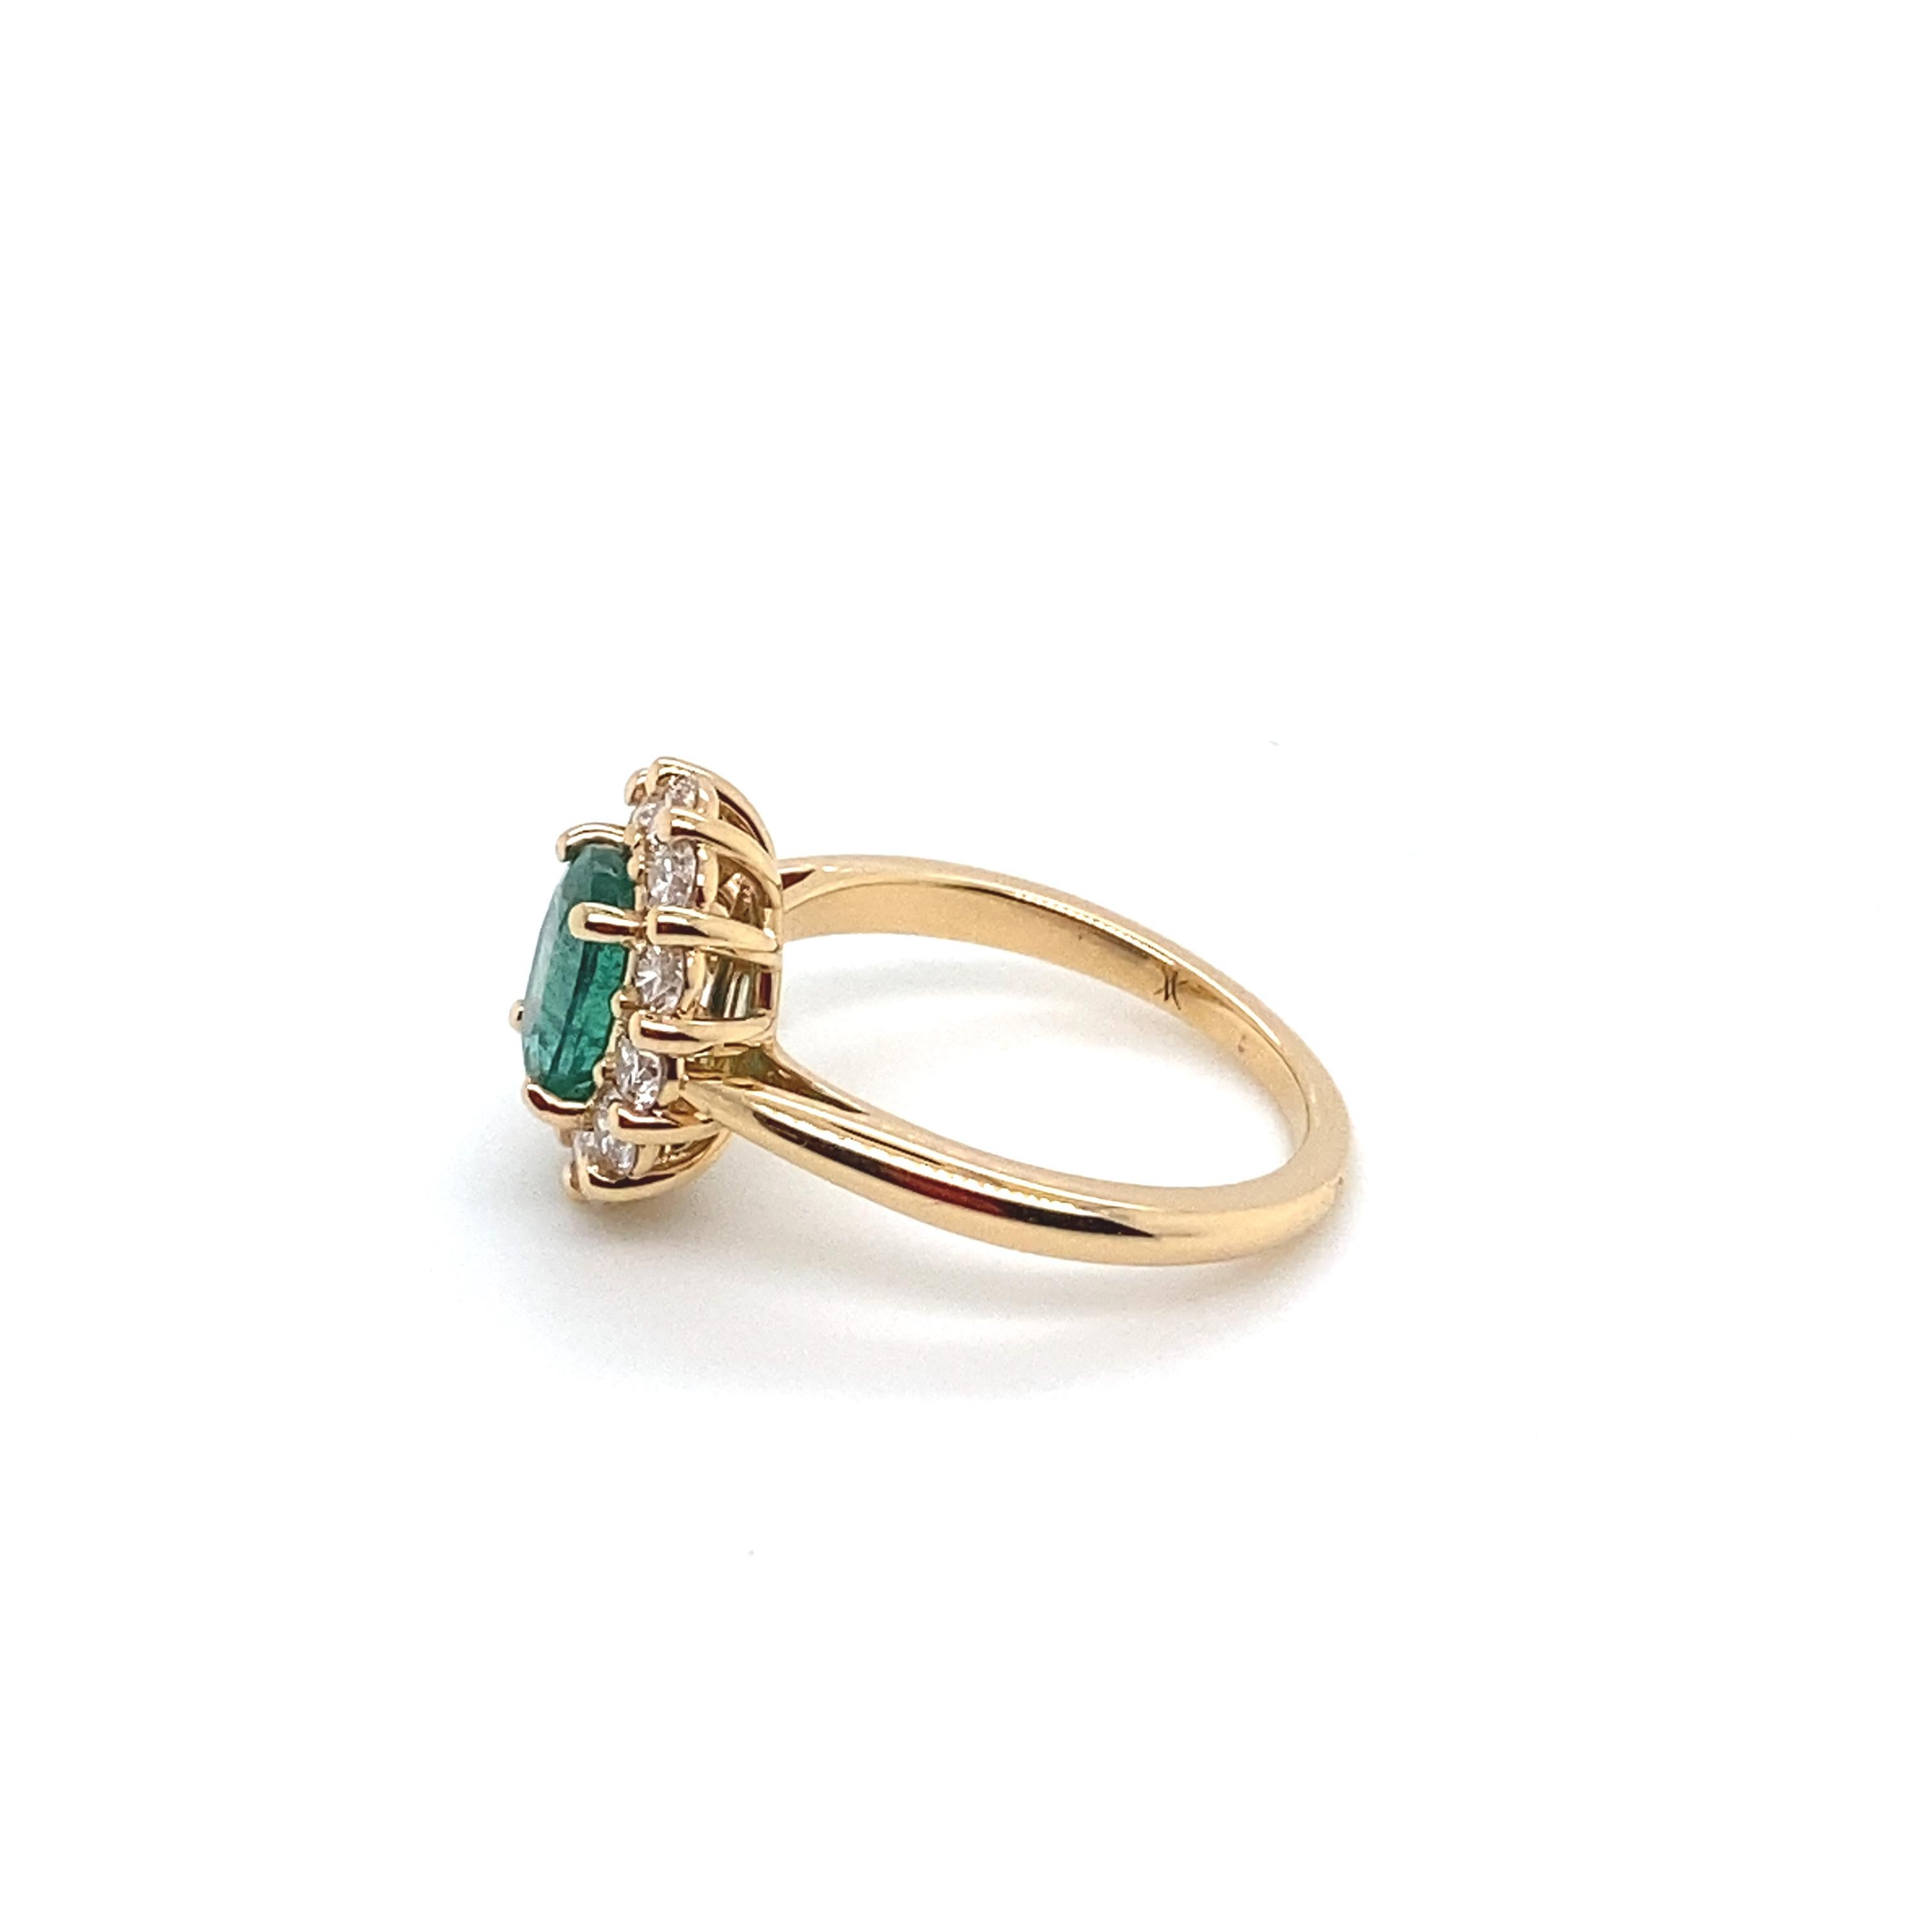 emerald surrounded by diamonds ring